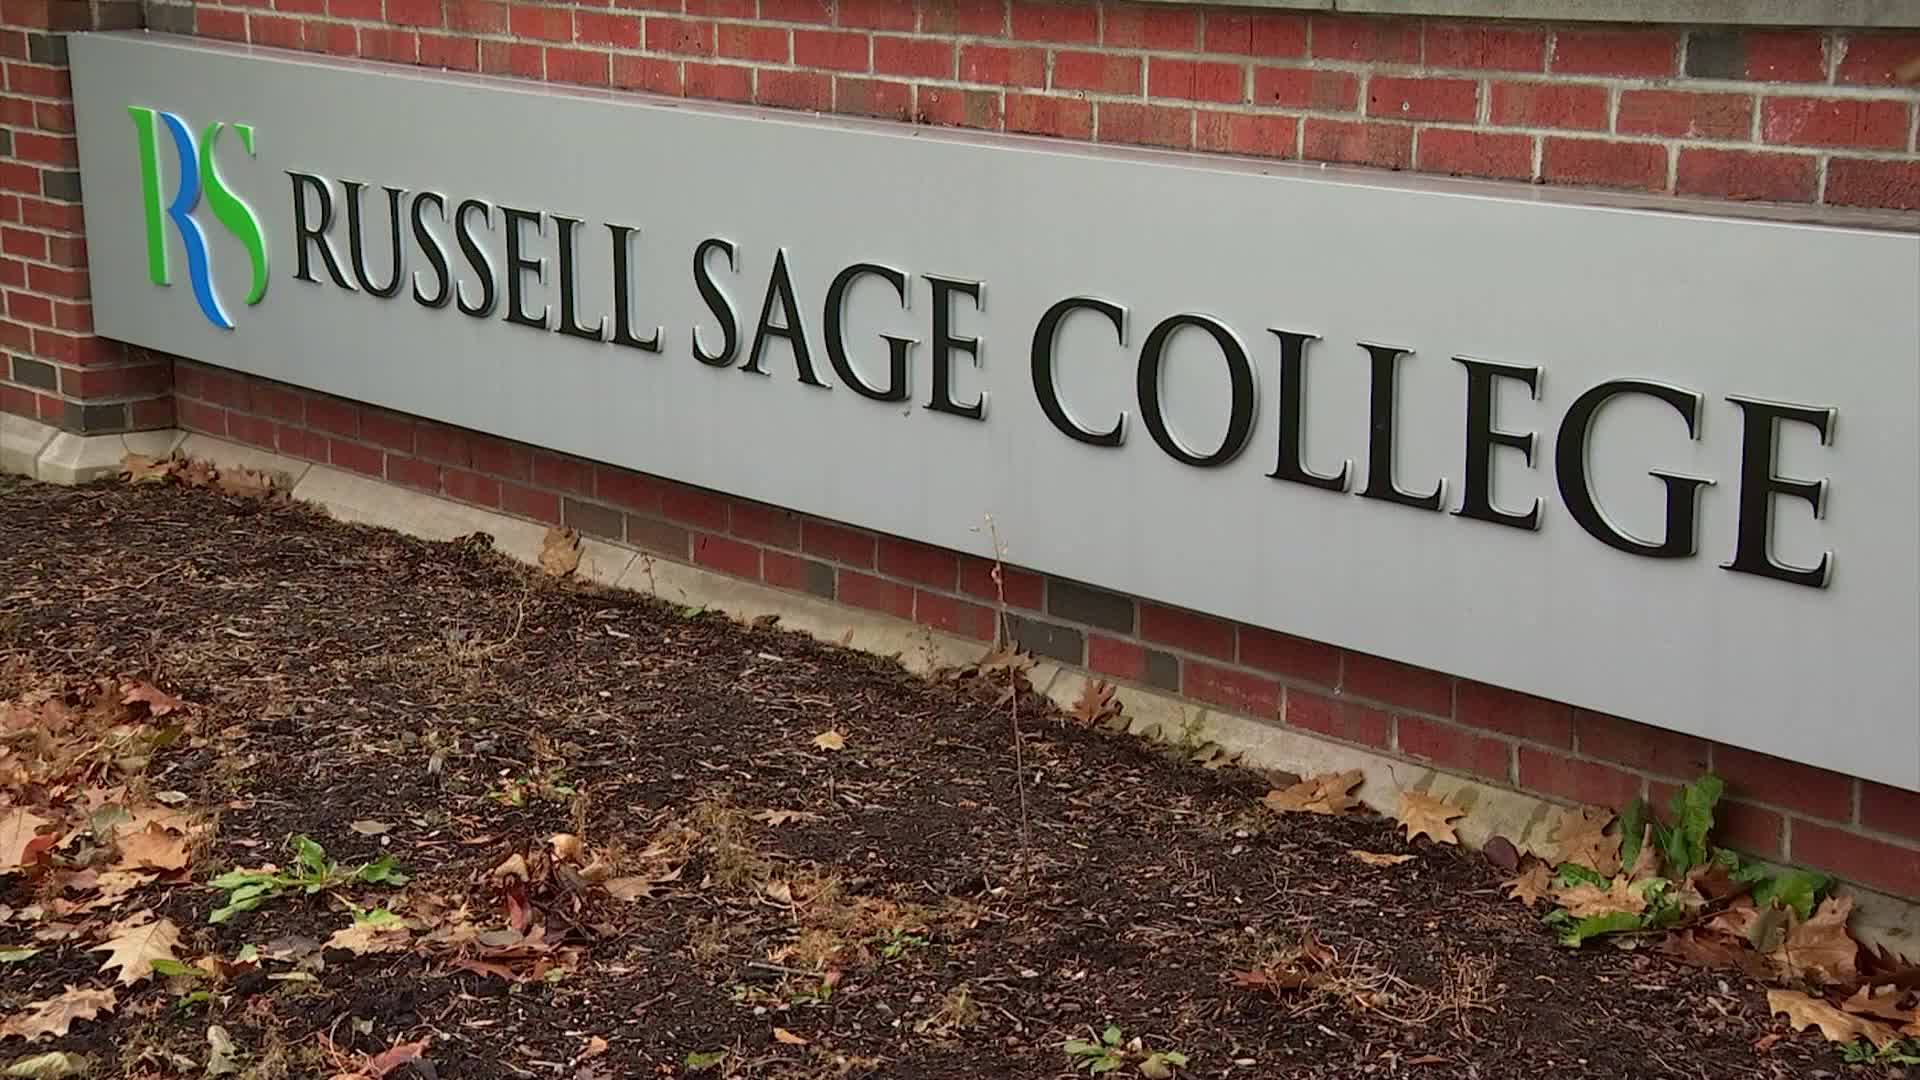 Russell Sage College rolls out welcome mat for Saint Rose students ...